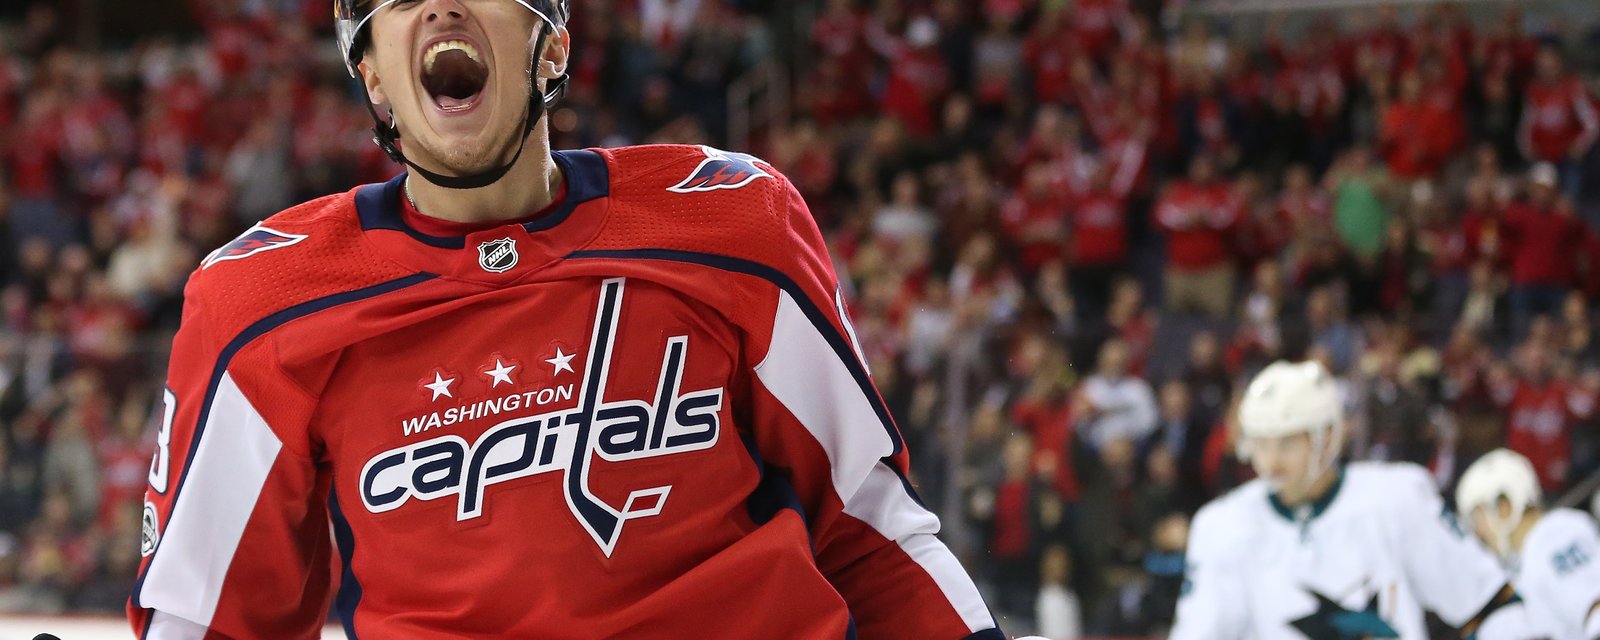 Vrana’s reputation gets destroyed as he seeks new contract…